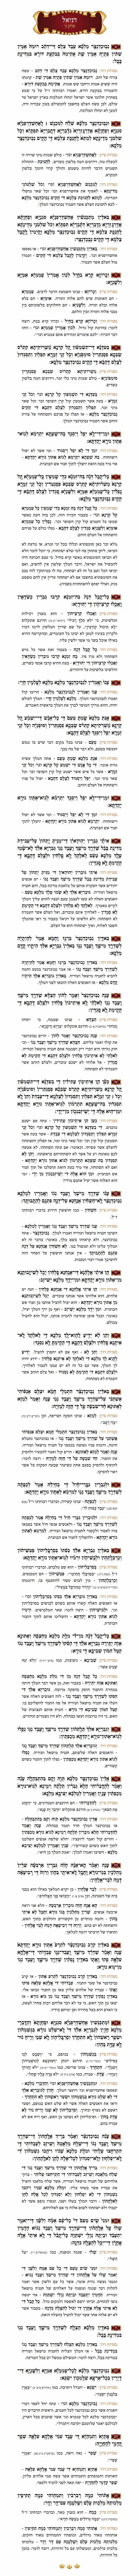 Sefer Daniel Chapter 3 with commentary